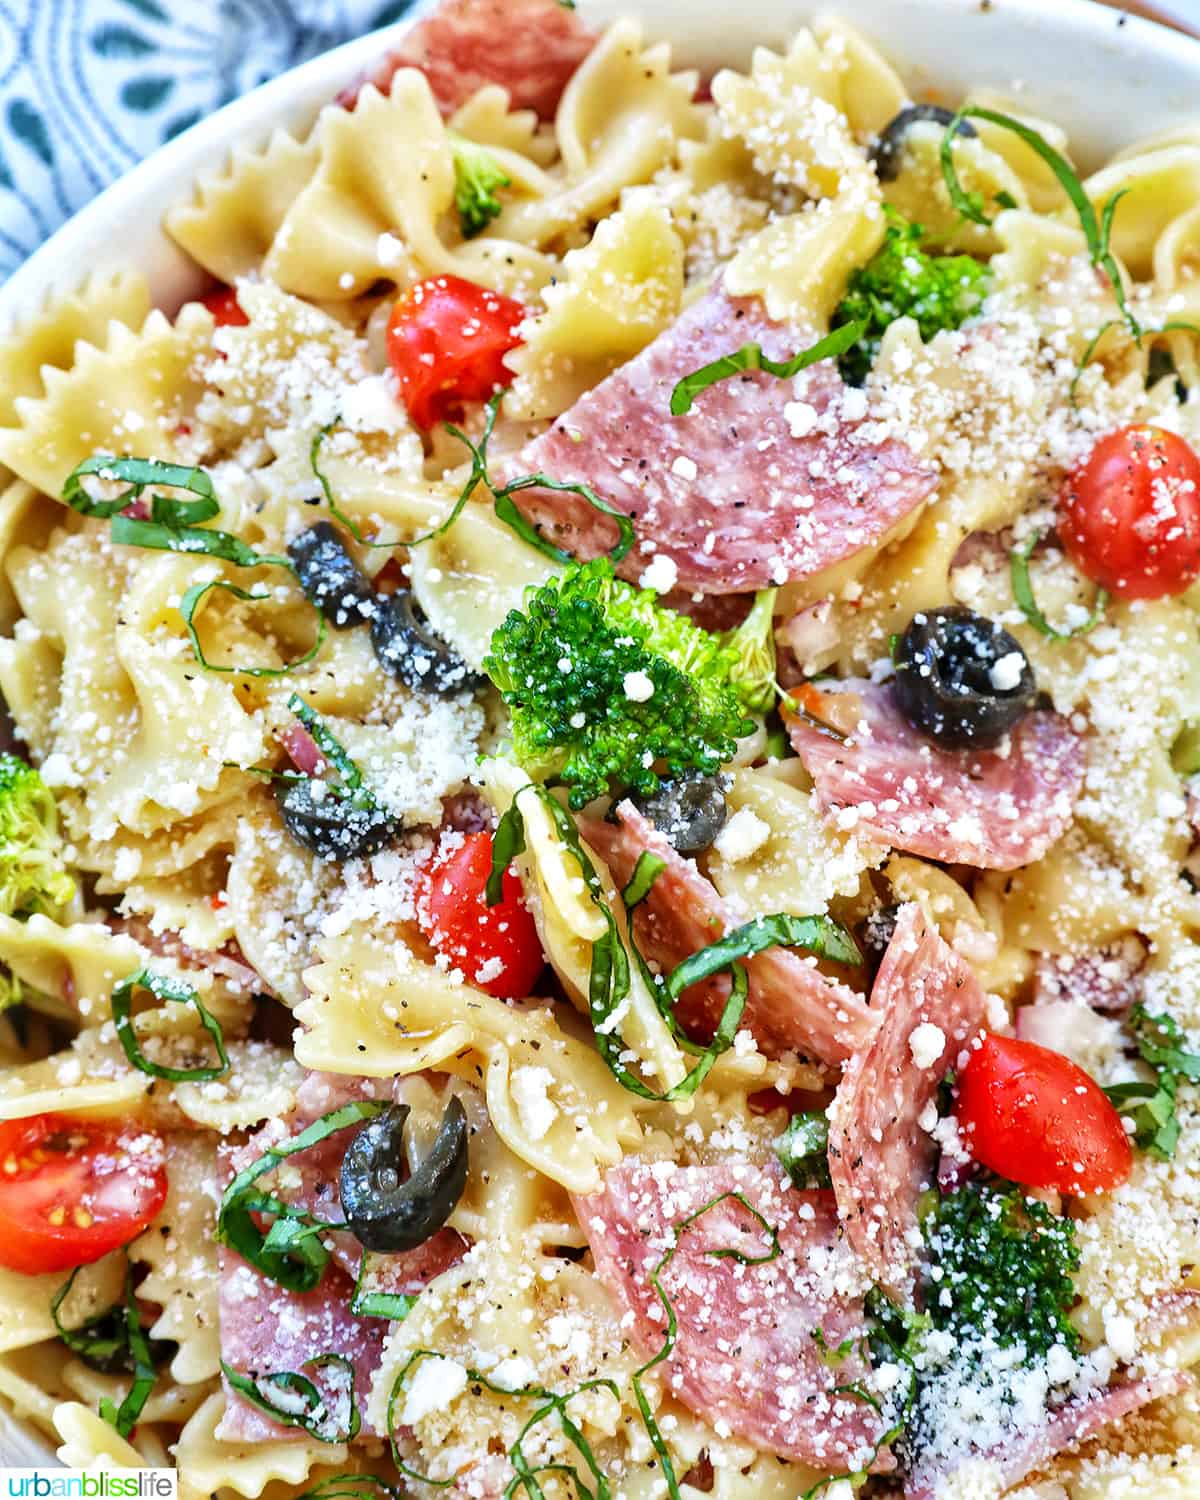 Italian bowtie pasta salad with salami, olives, tomatoes, broccoli, and parmesan cheese in a white bowl.